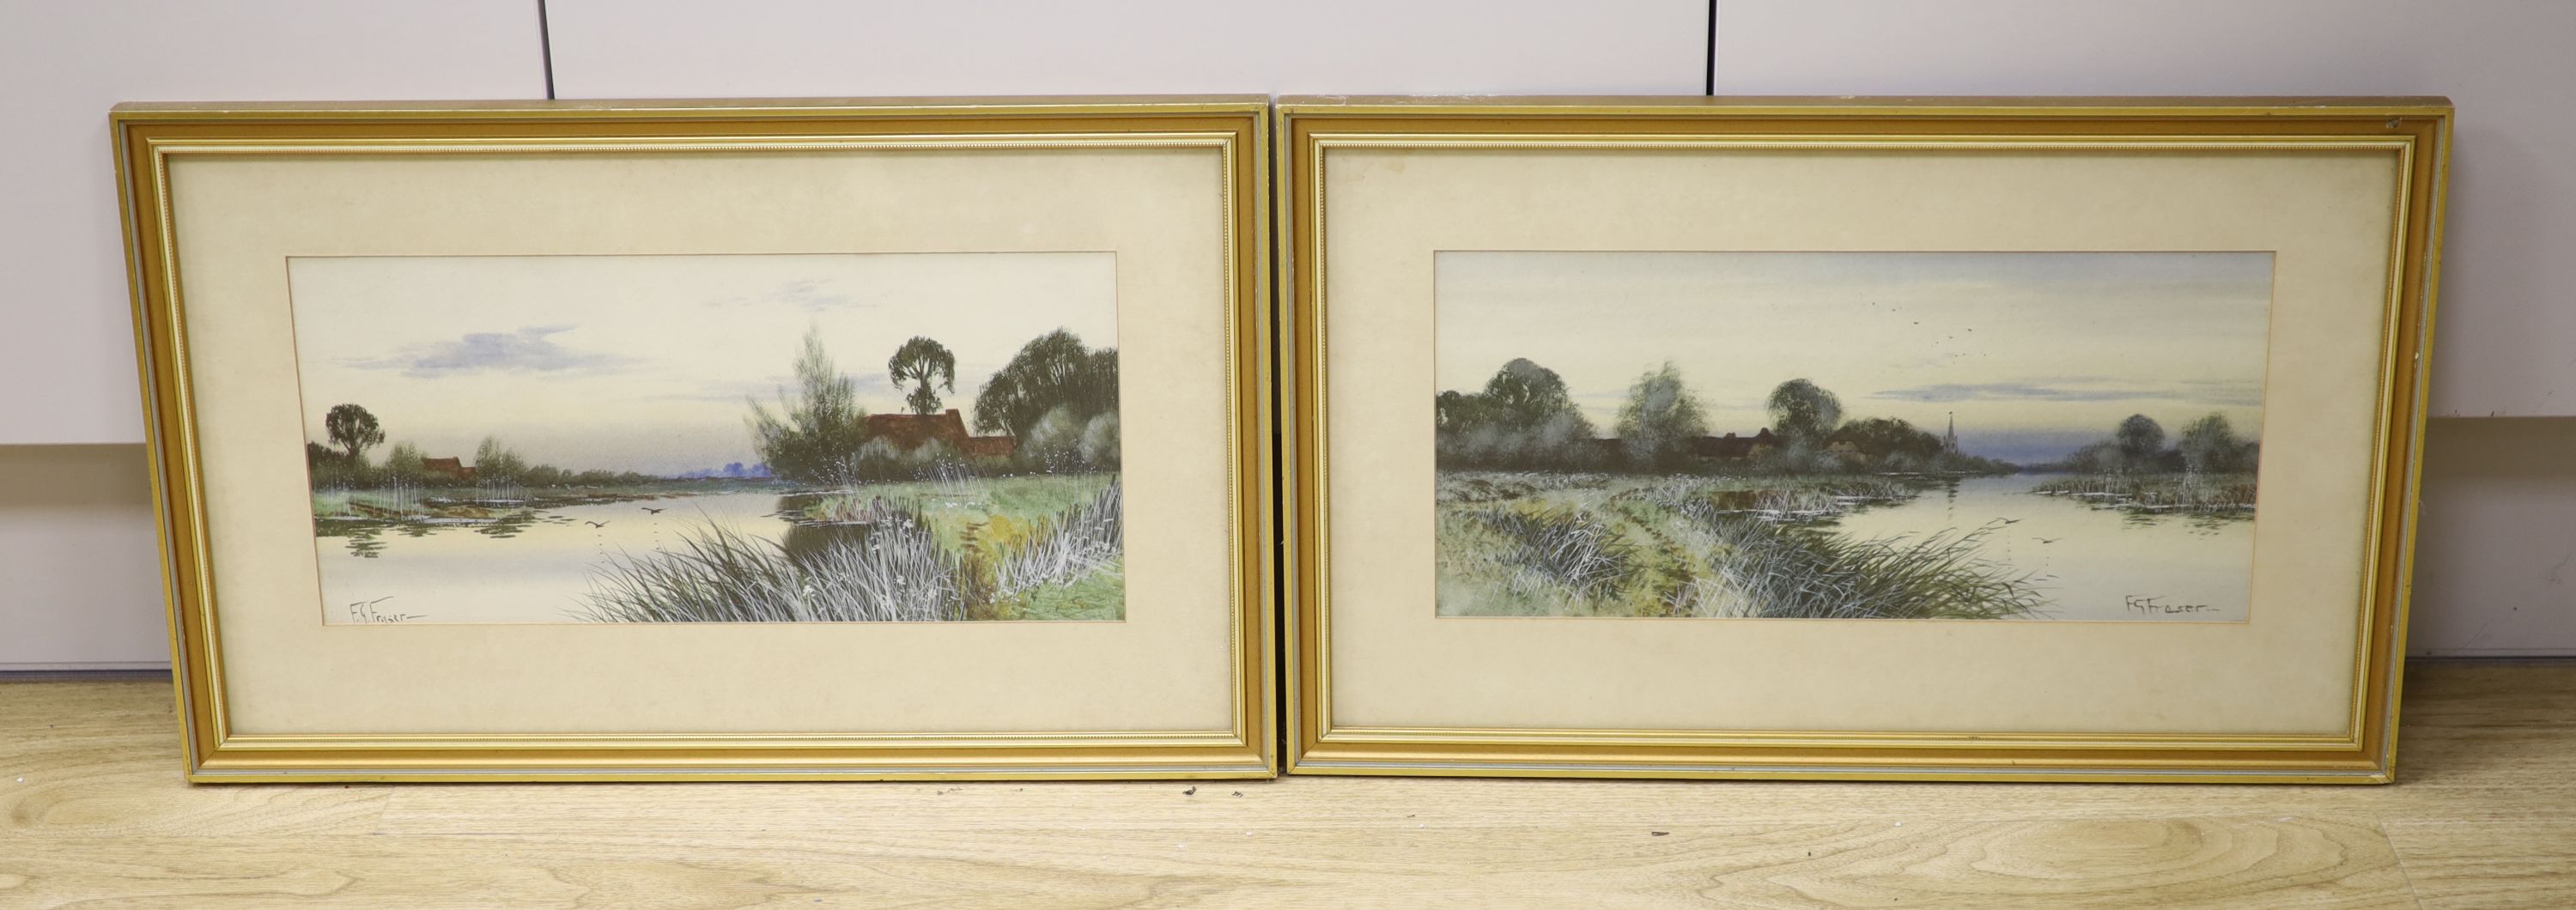 Francis Gordon Fraser (1879-1940), pair of watercolours, River landscapes, signed, 17 x 36cm